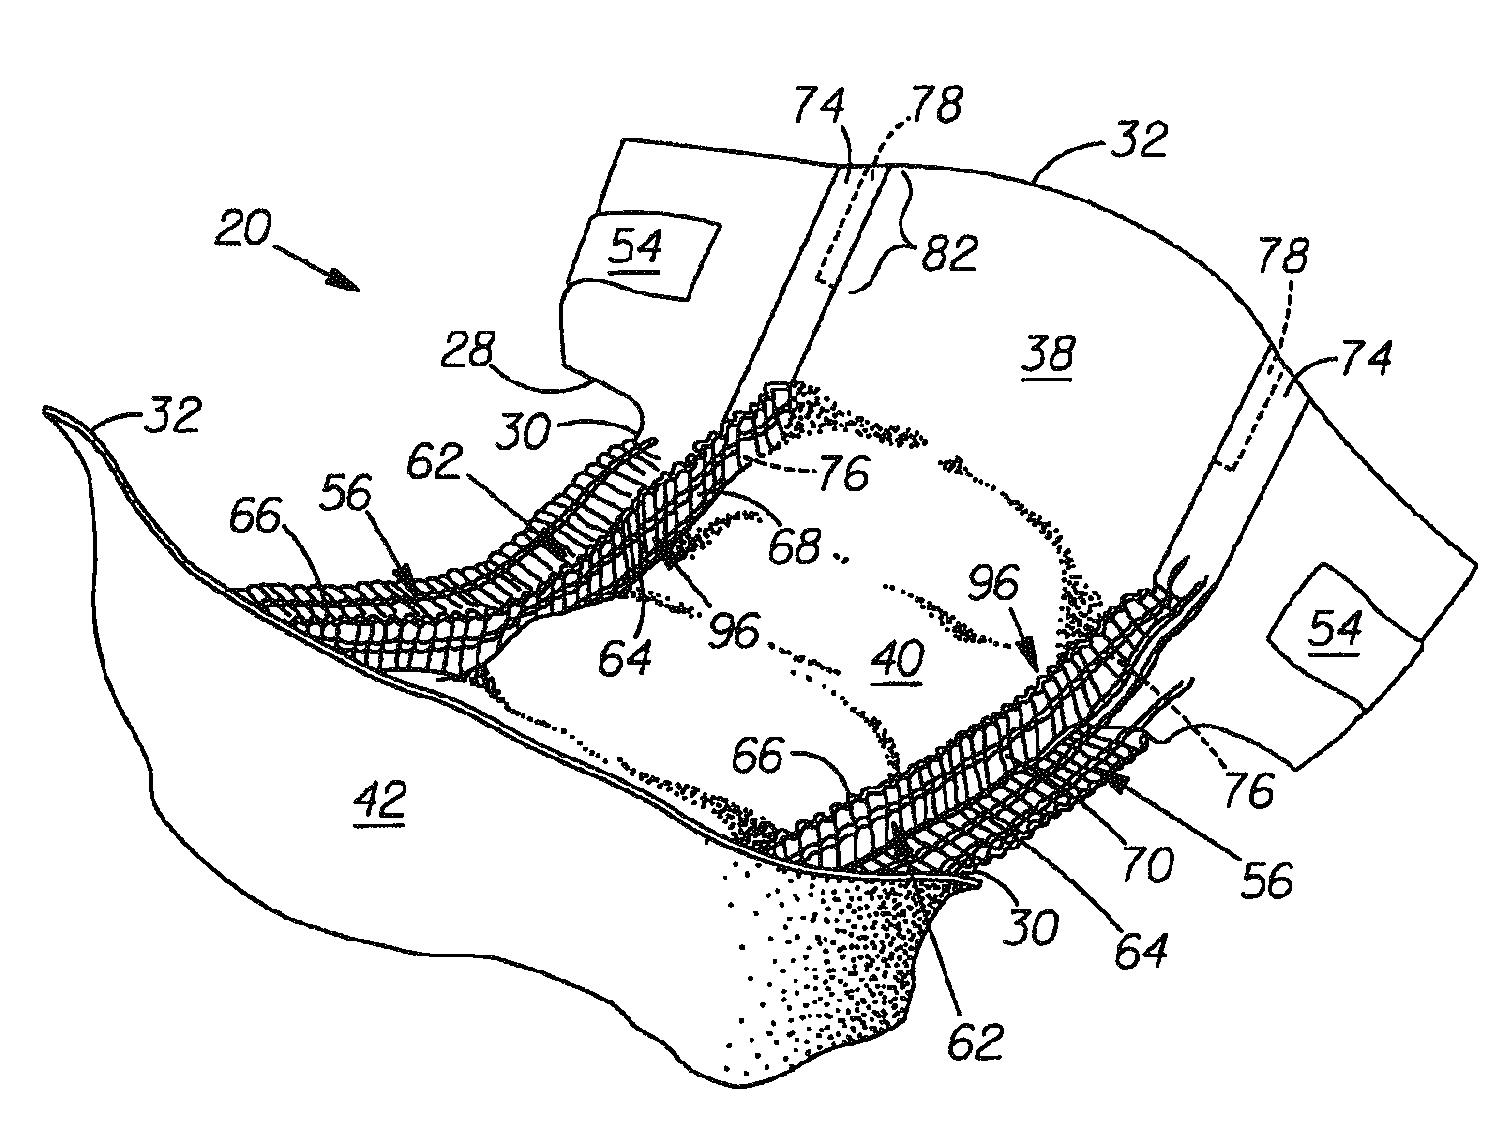 Barrier cuff for a unitary disposable absorbent article having intermediate bond for sustained fit